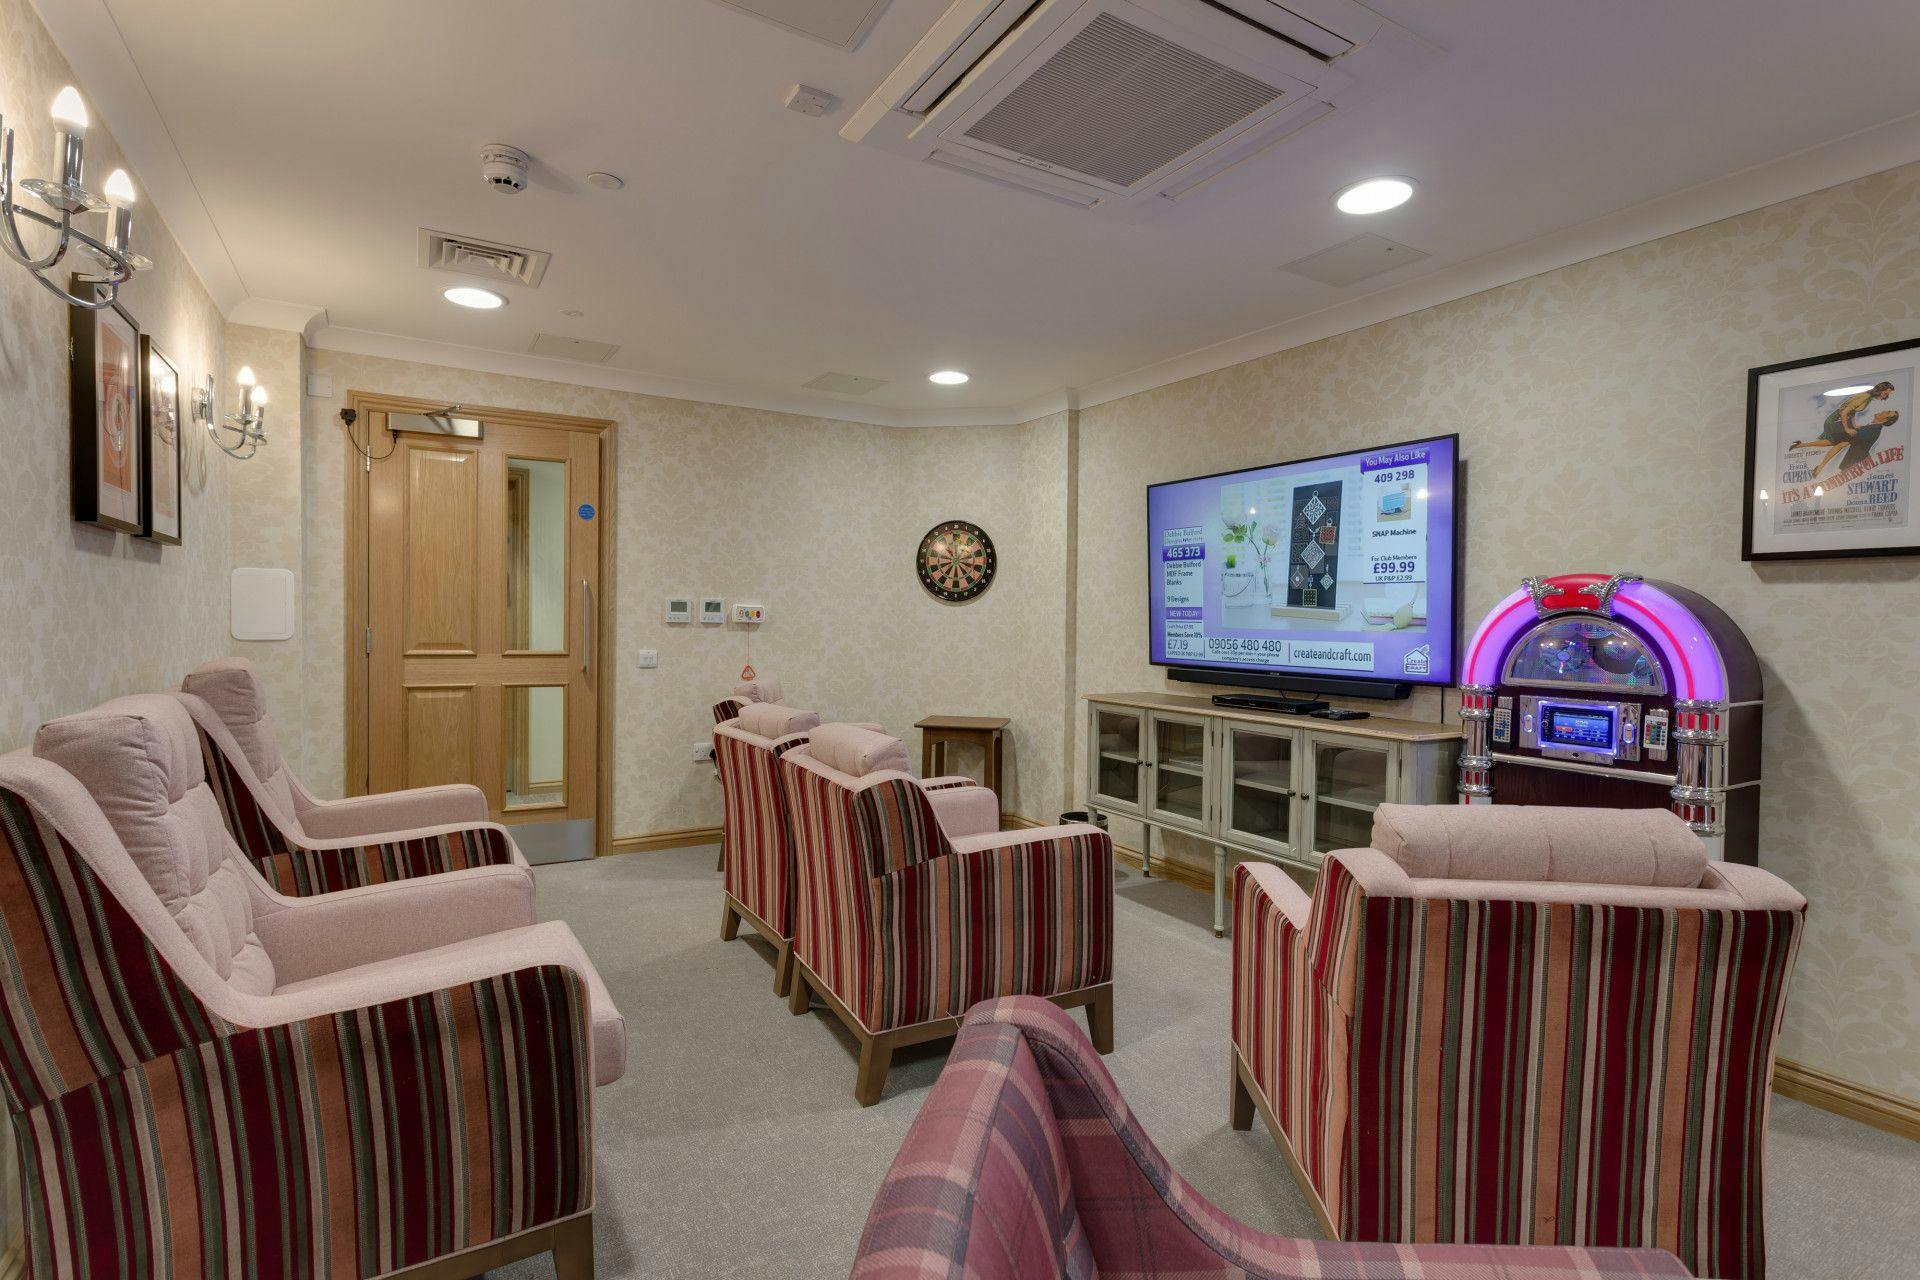 Care UK - Harrier Lodge care home 13